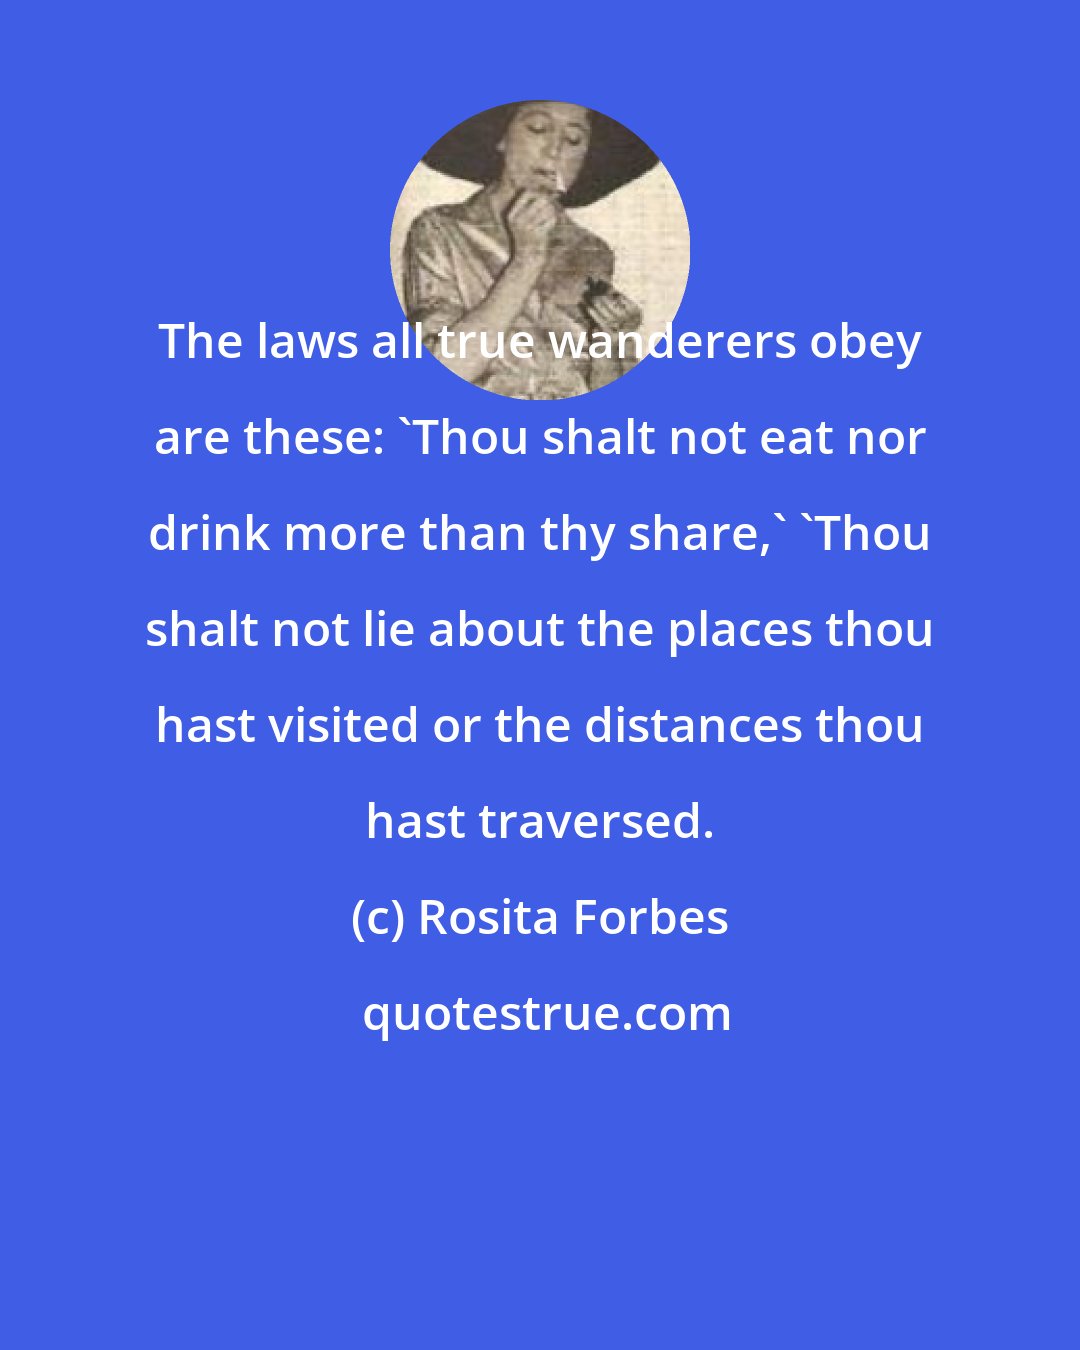 Rosita Forbes: The laws all true wanderers obey are these: 'Thou shalt not eat nor drink more than thy share,' 'Thou shalt not lie about the places thou hast visited or the distances thou hast traversed.